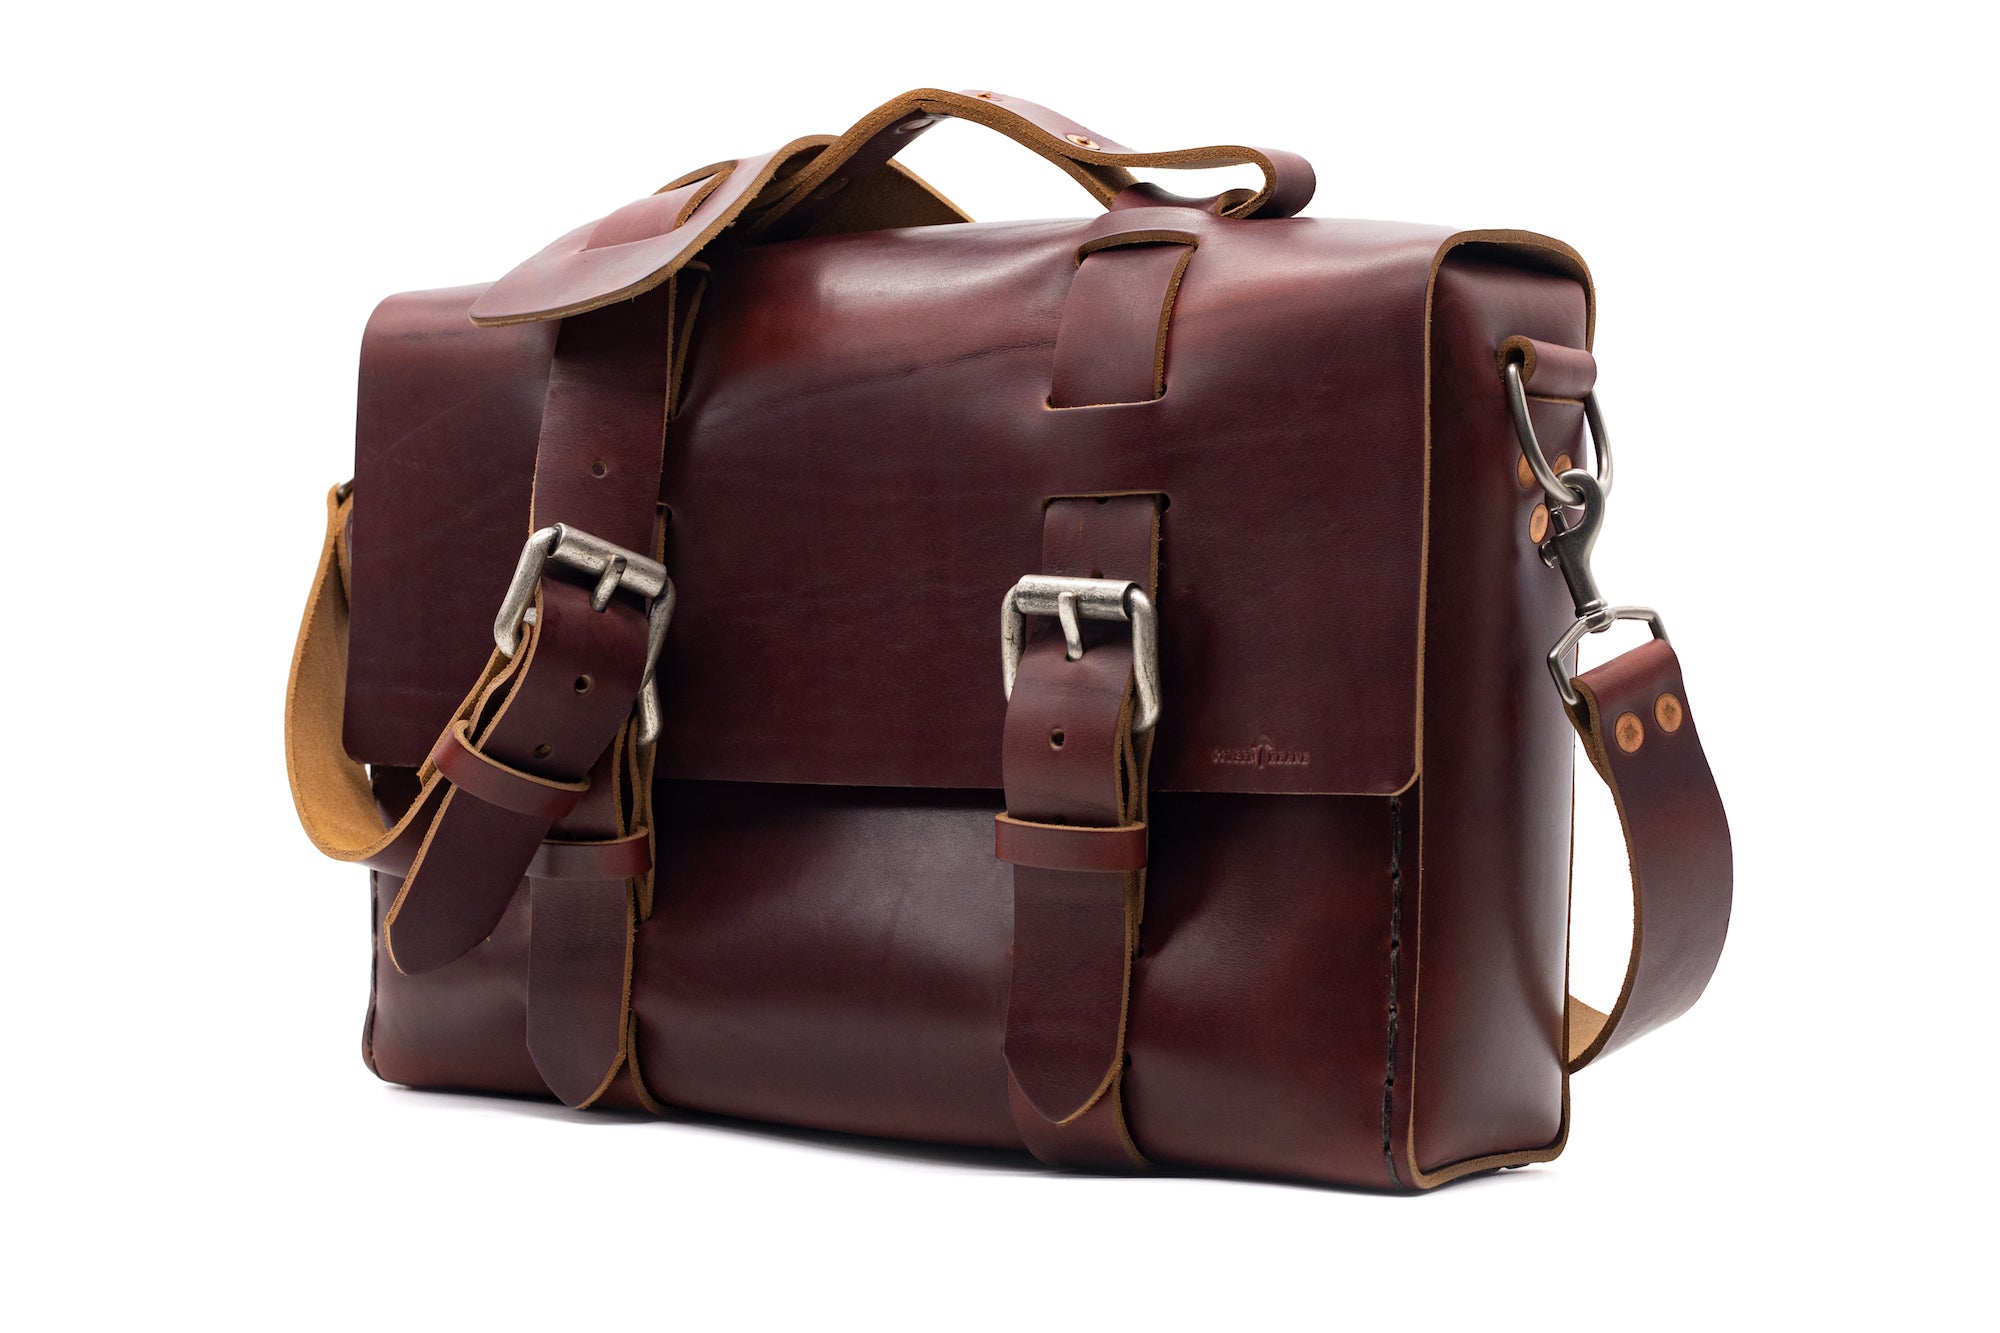 Limited Edition No. 4313 - Minimalist Standard Leather Satchel in Clement Brown - ONLY 1 MADE